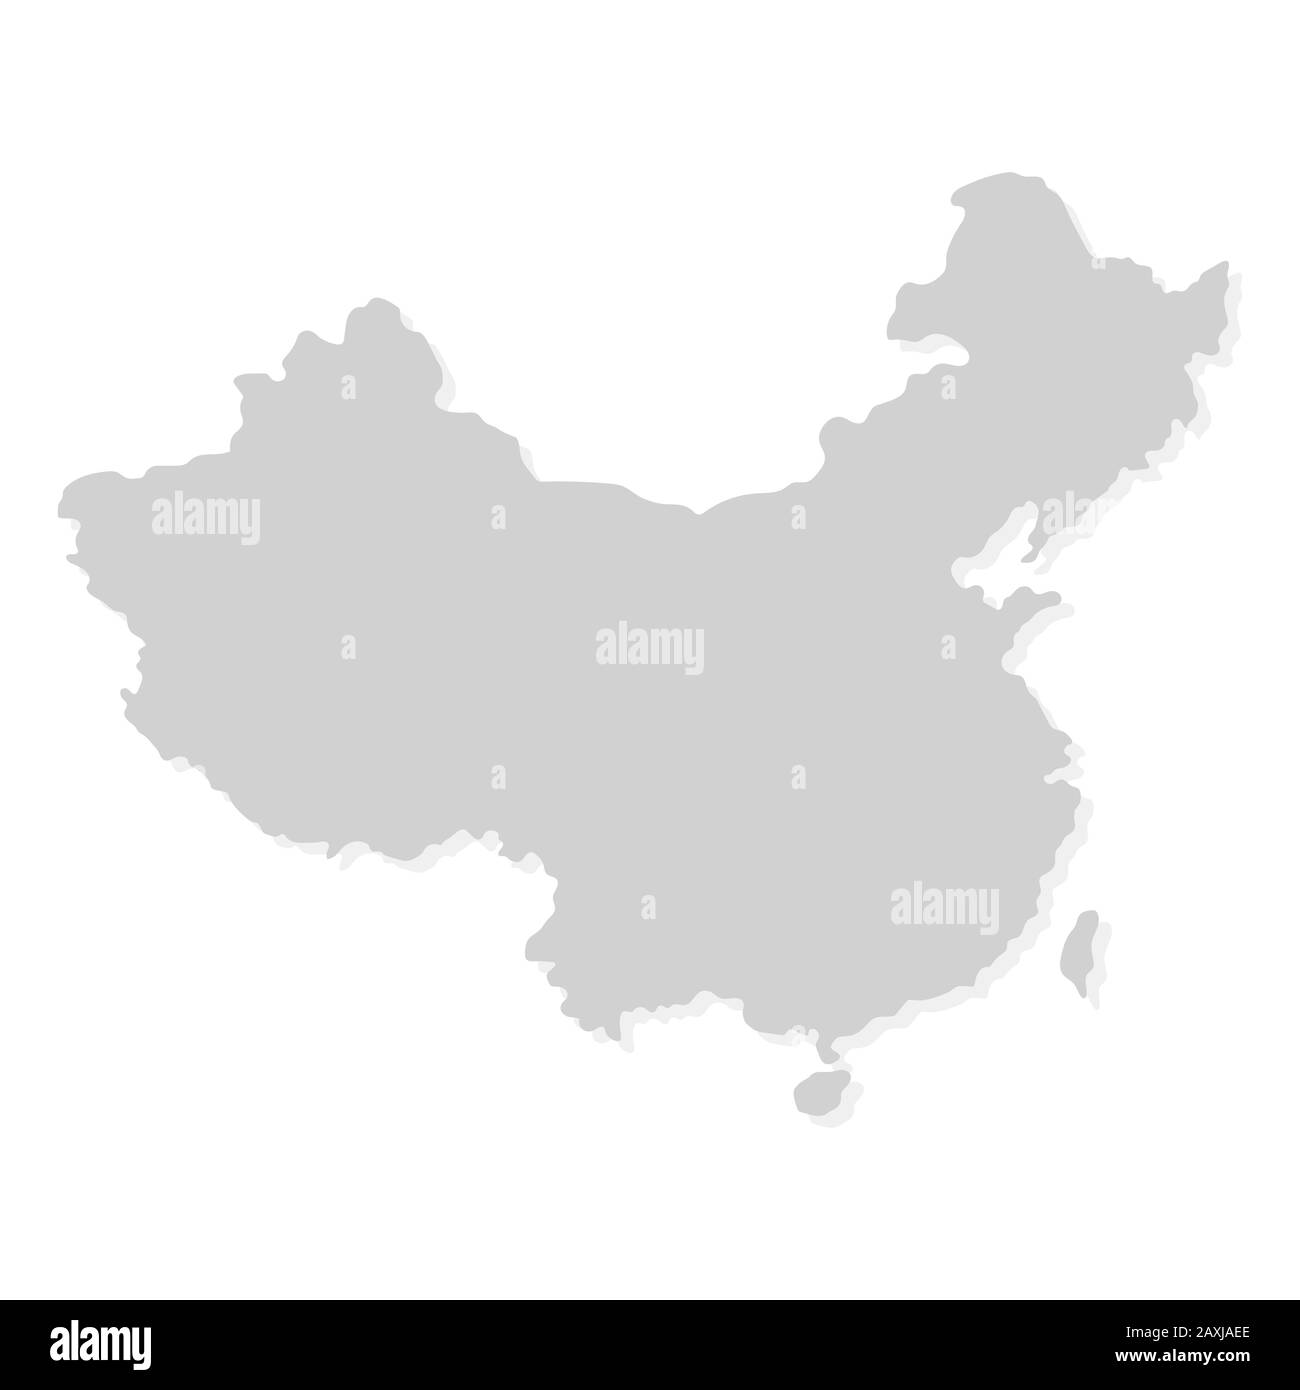 China map isolated on white background. Map with shadow. Vector illustration for any design. Stock Vector